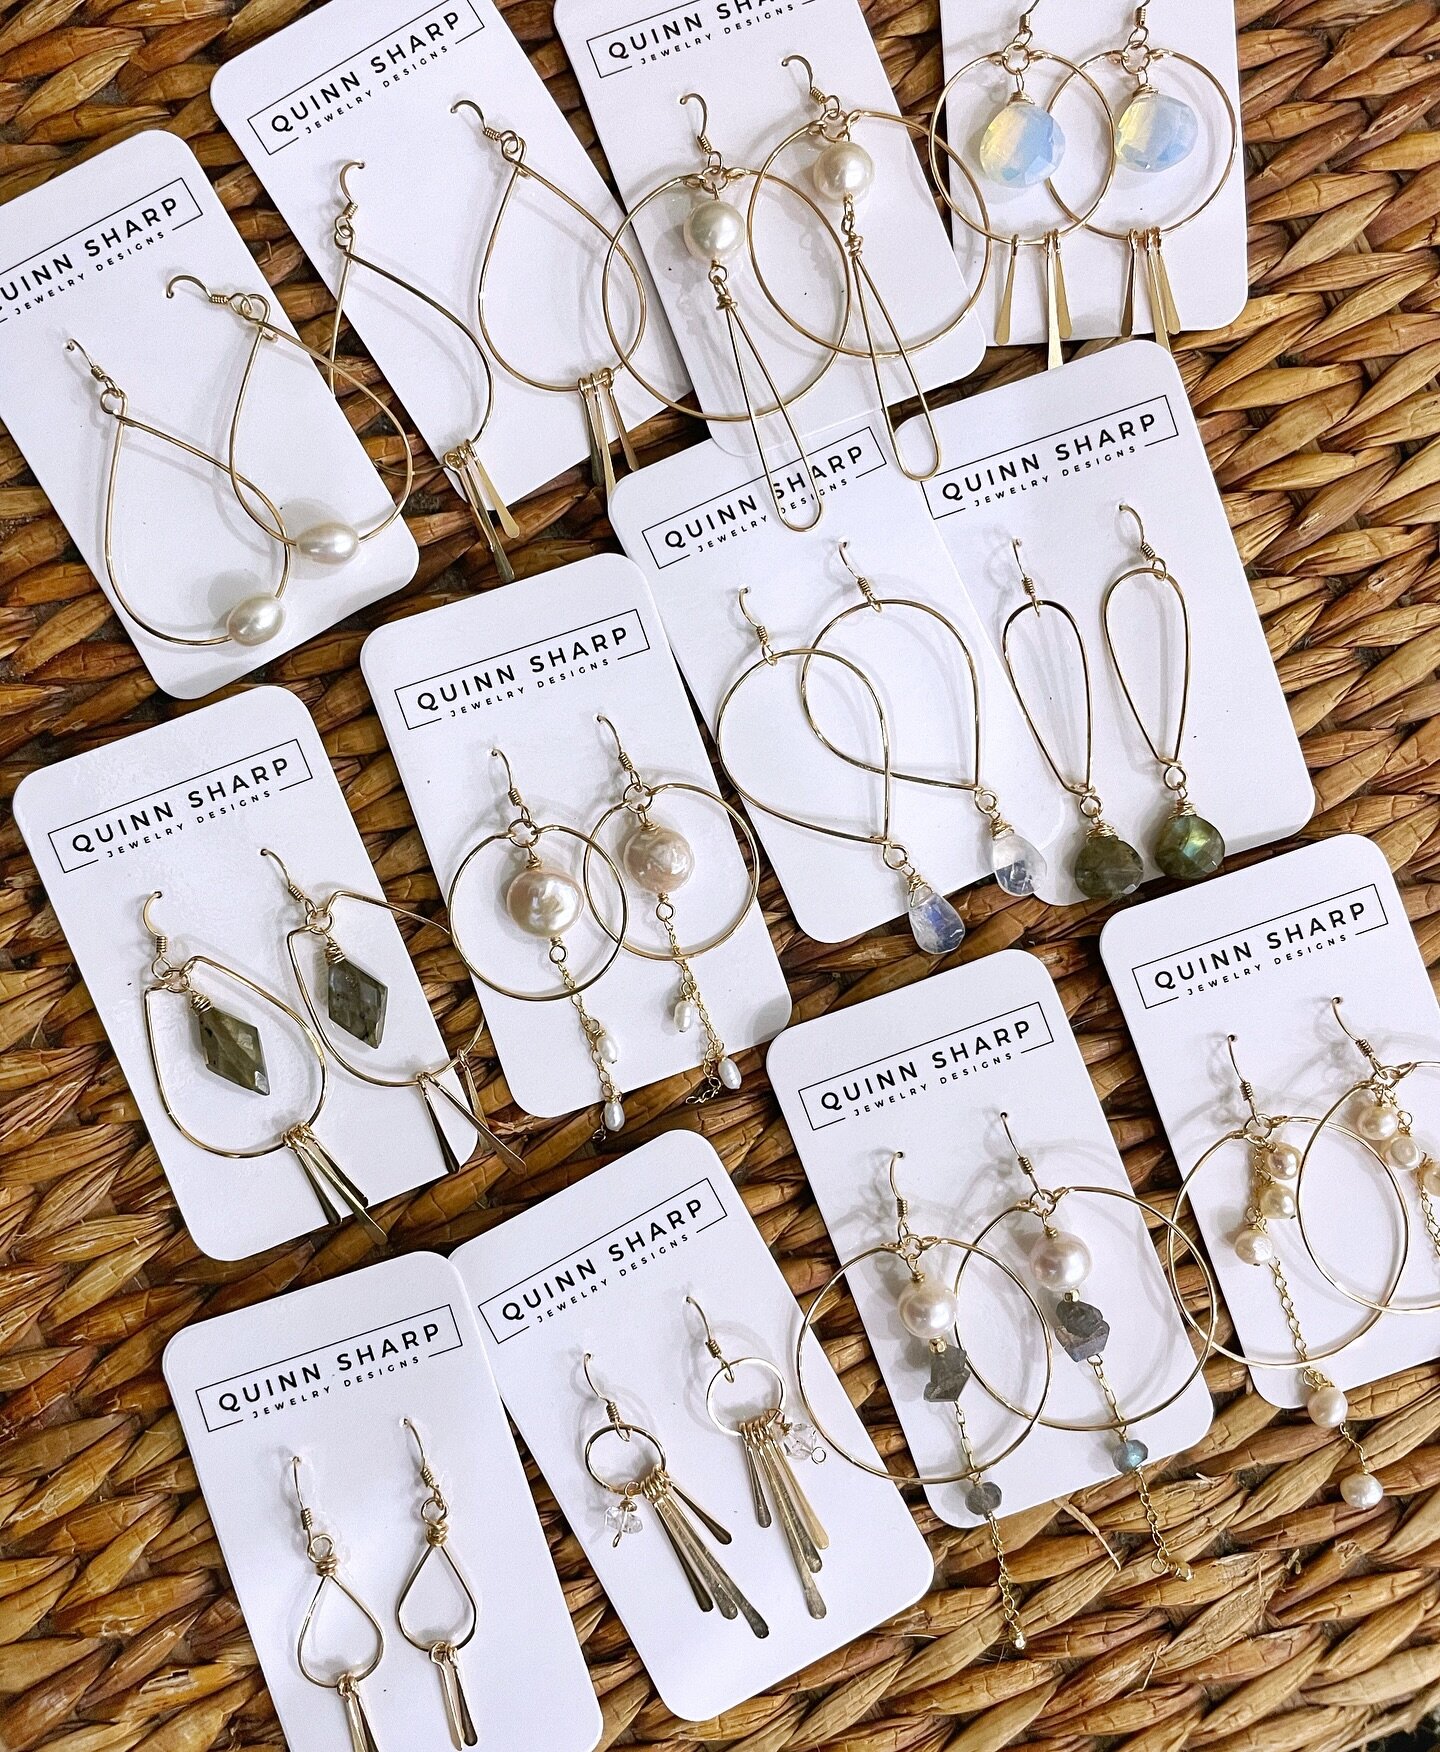 A new shipment of earrings are shipping to Cloverdale! Thank you @erinmaviscloverdale for featuring my jewelry line in your shop!!